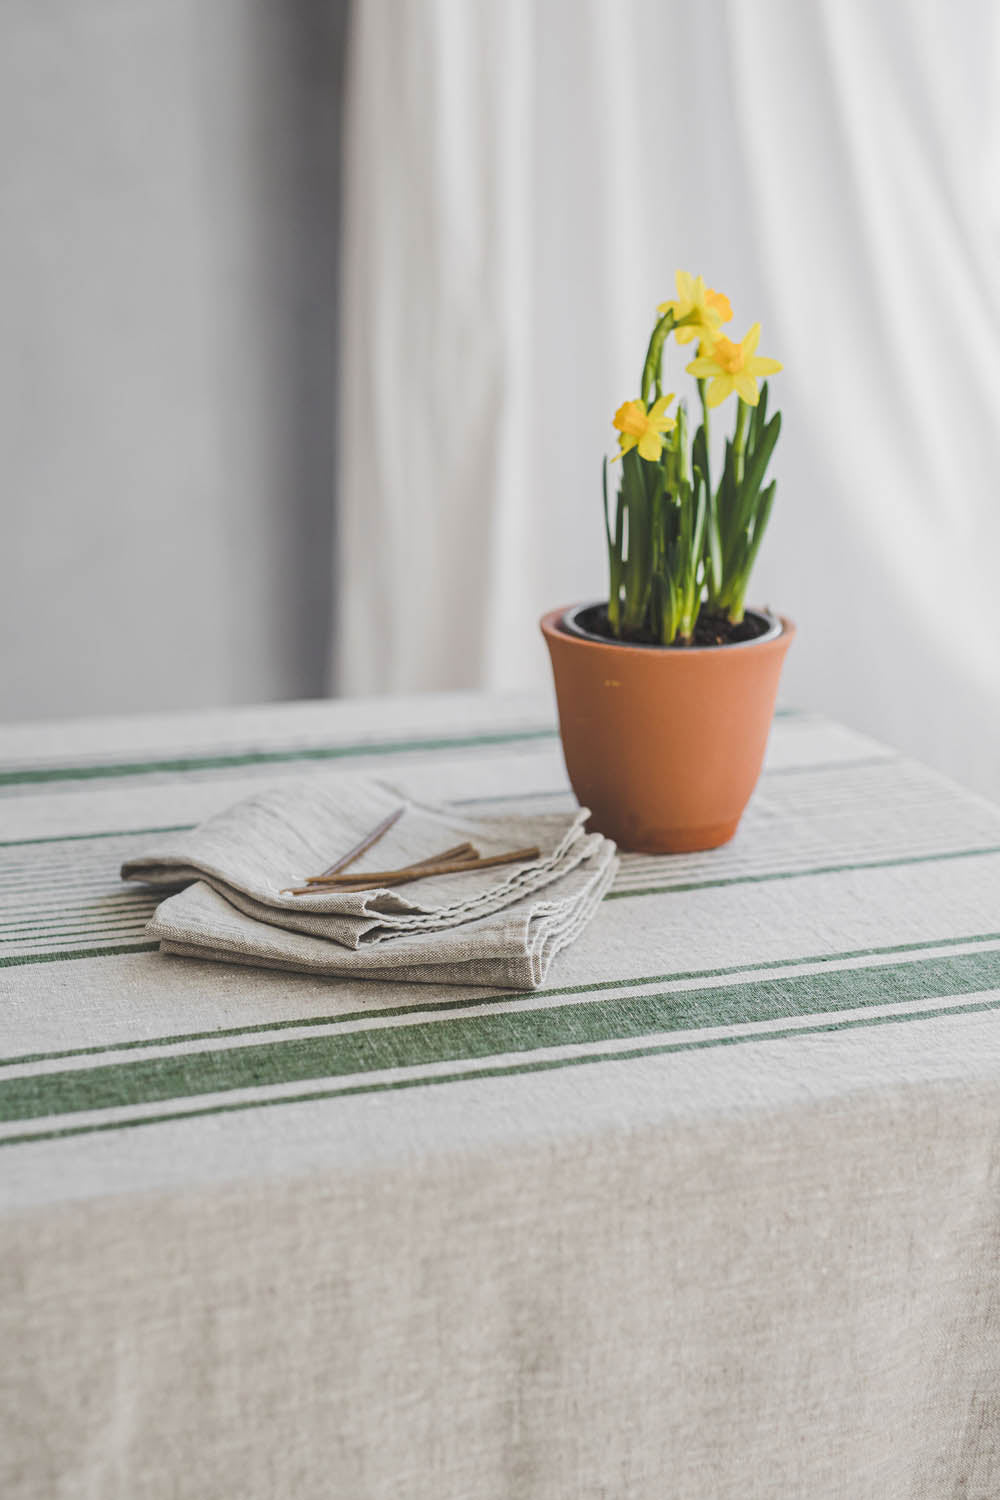 Natural linen napkins from French style linen fabric